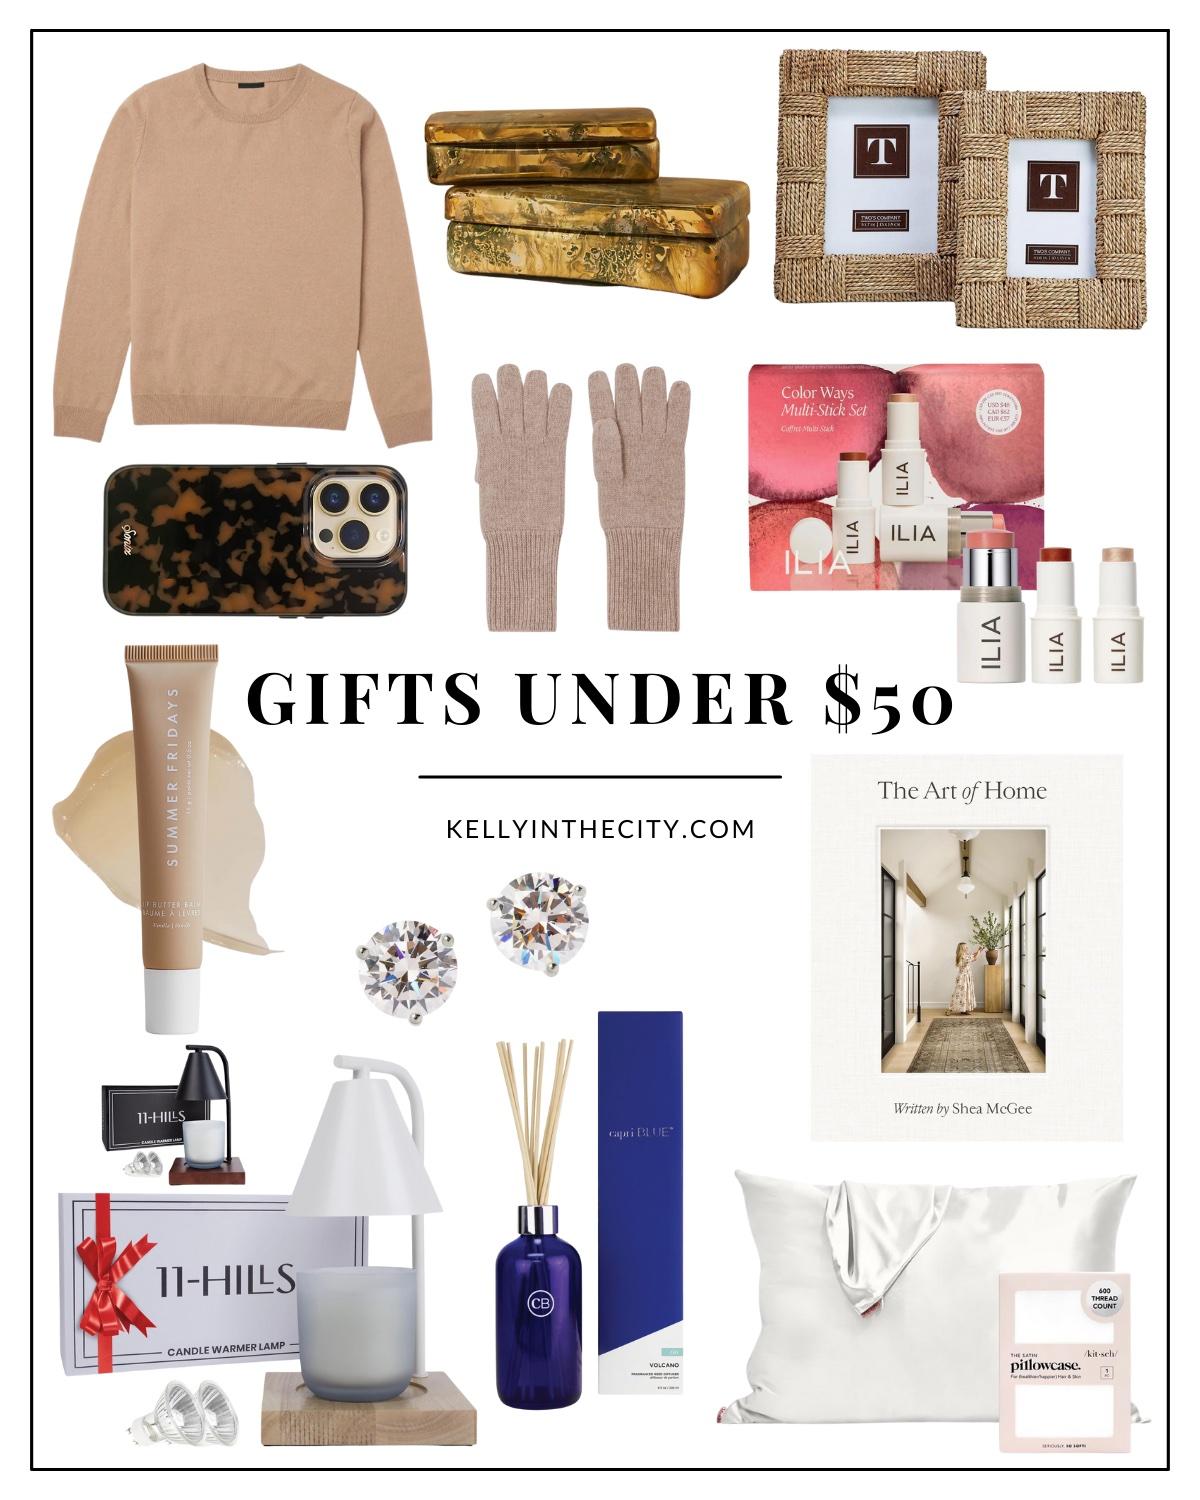 The Best Gifts: Under-$50 Finds on